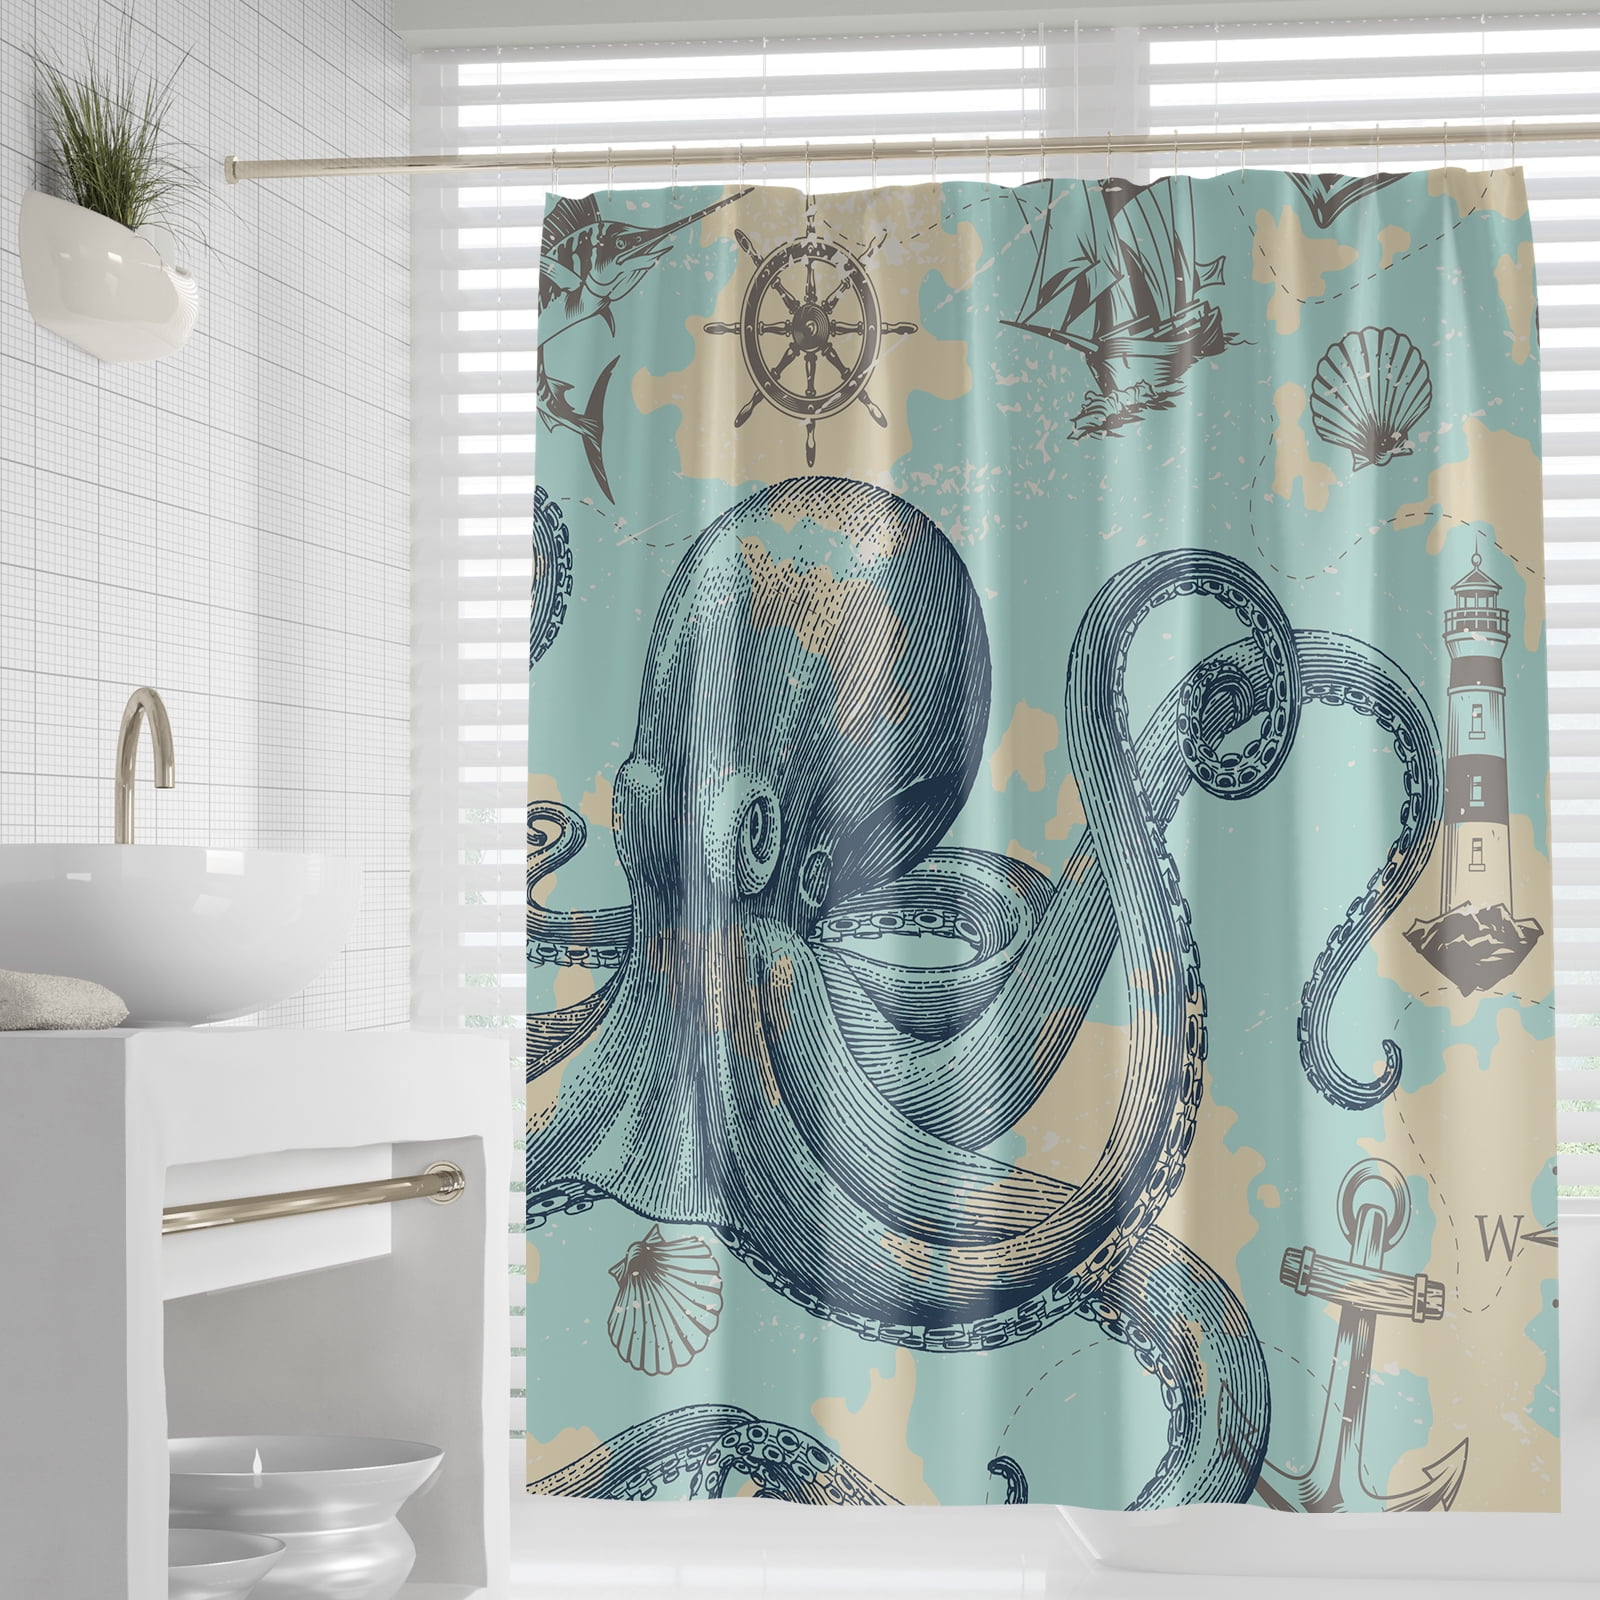 Details about   Waterproof Shower Curtains for Bathroom Home Decor Multi-size Shower Curtains 